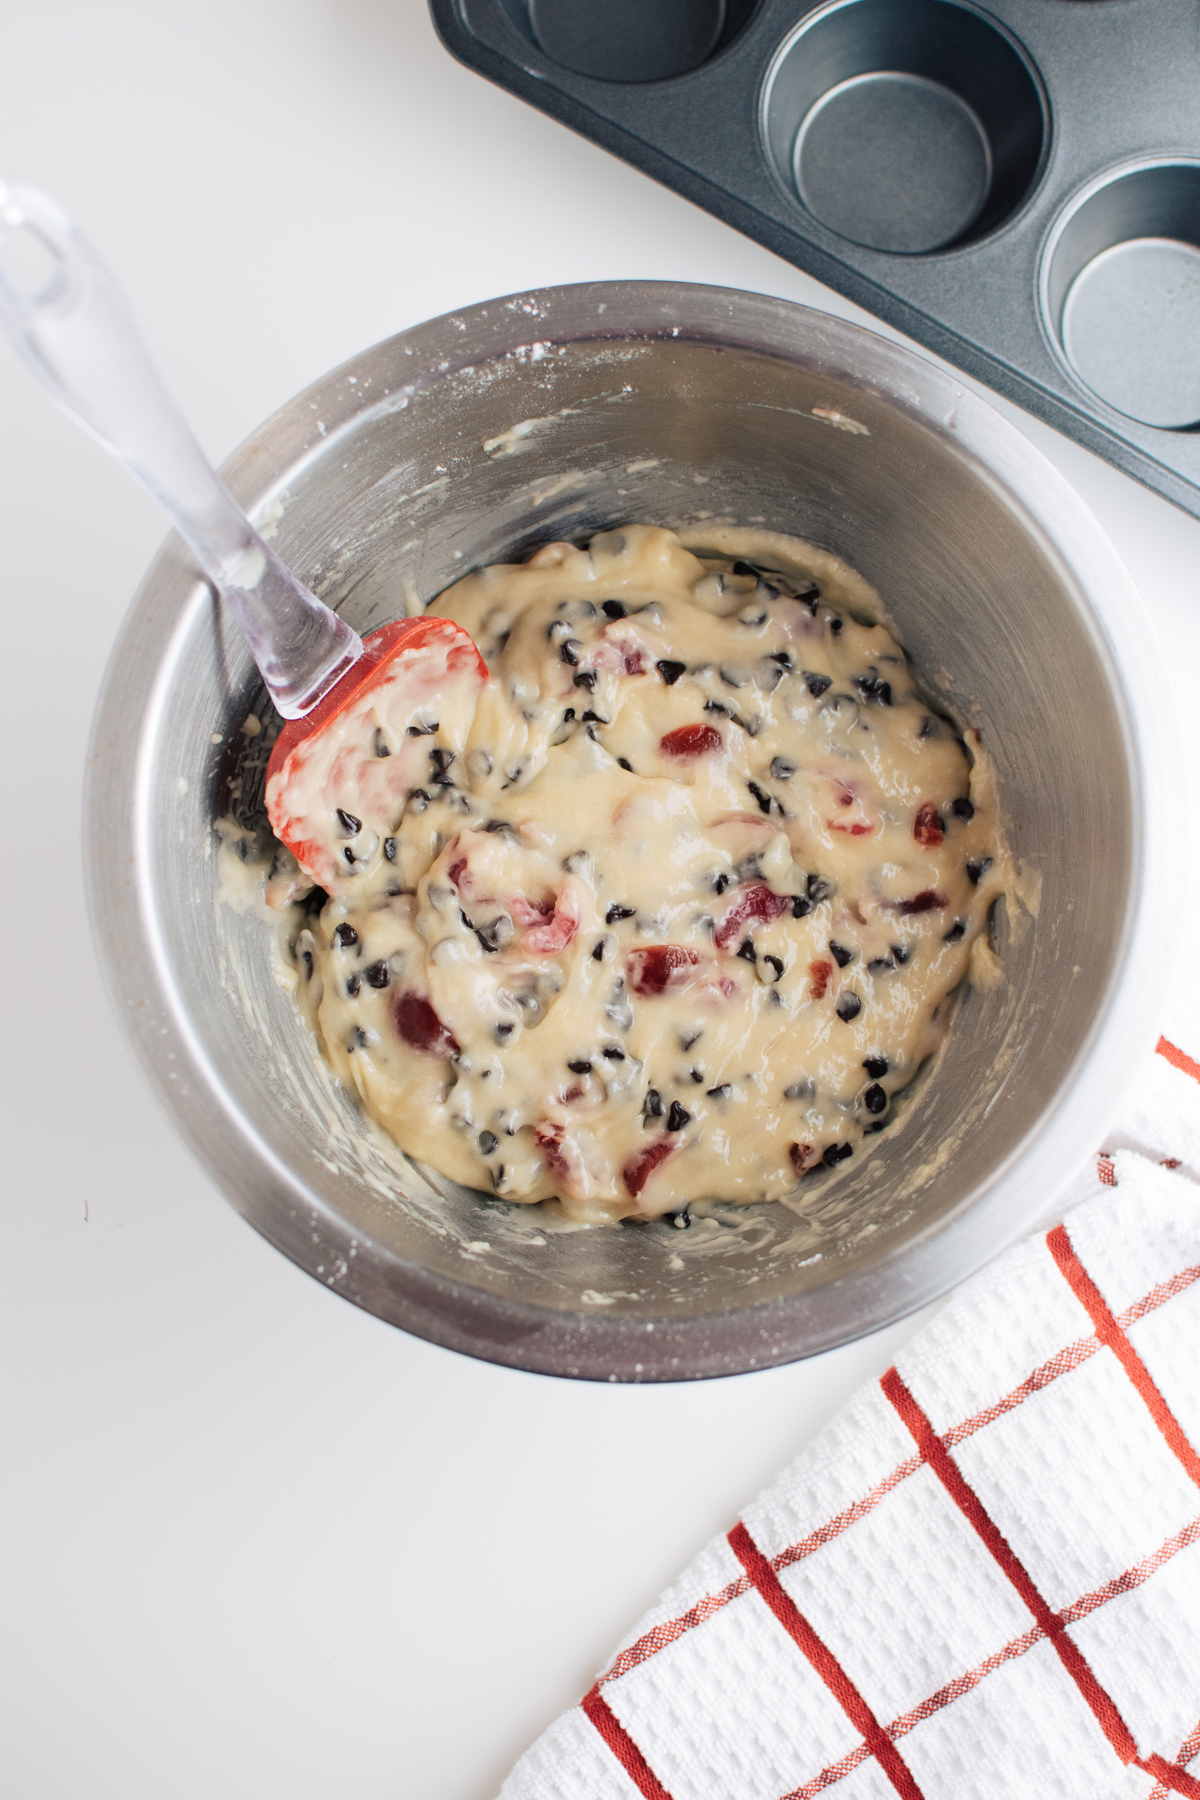 Cherry chocolate chip muffin batter in metal mixing bowl with red and clear plastic spatula.